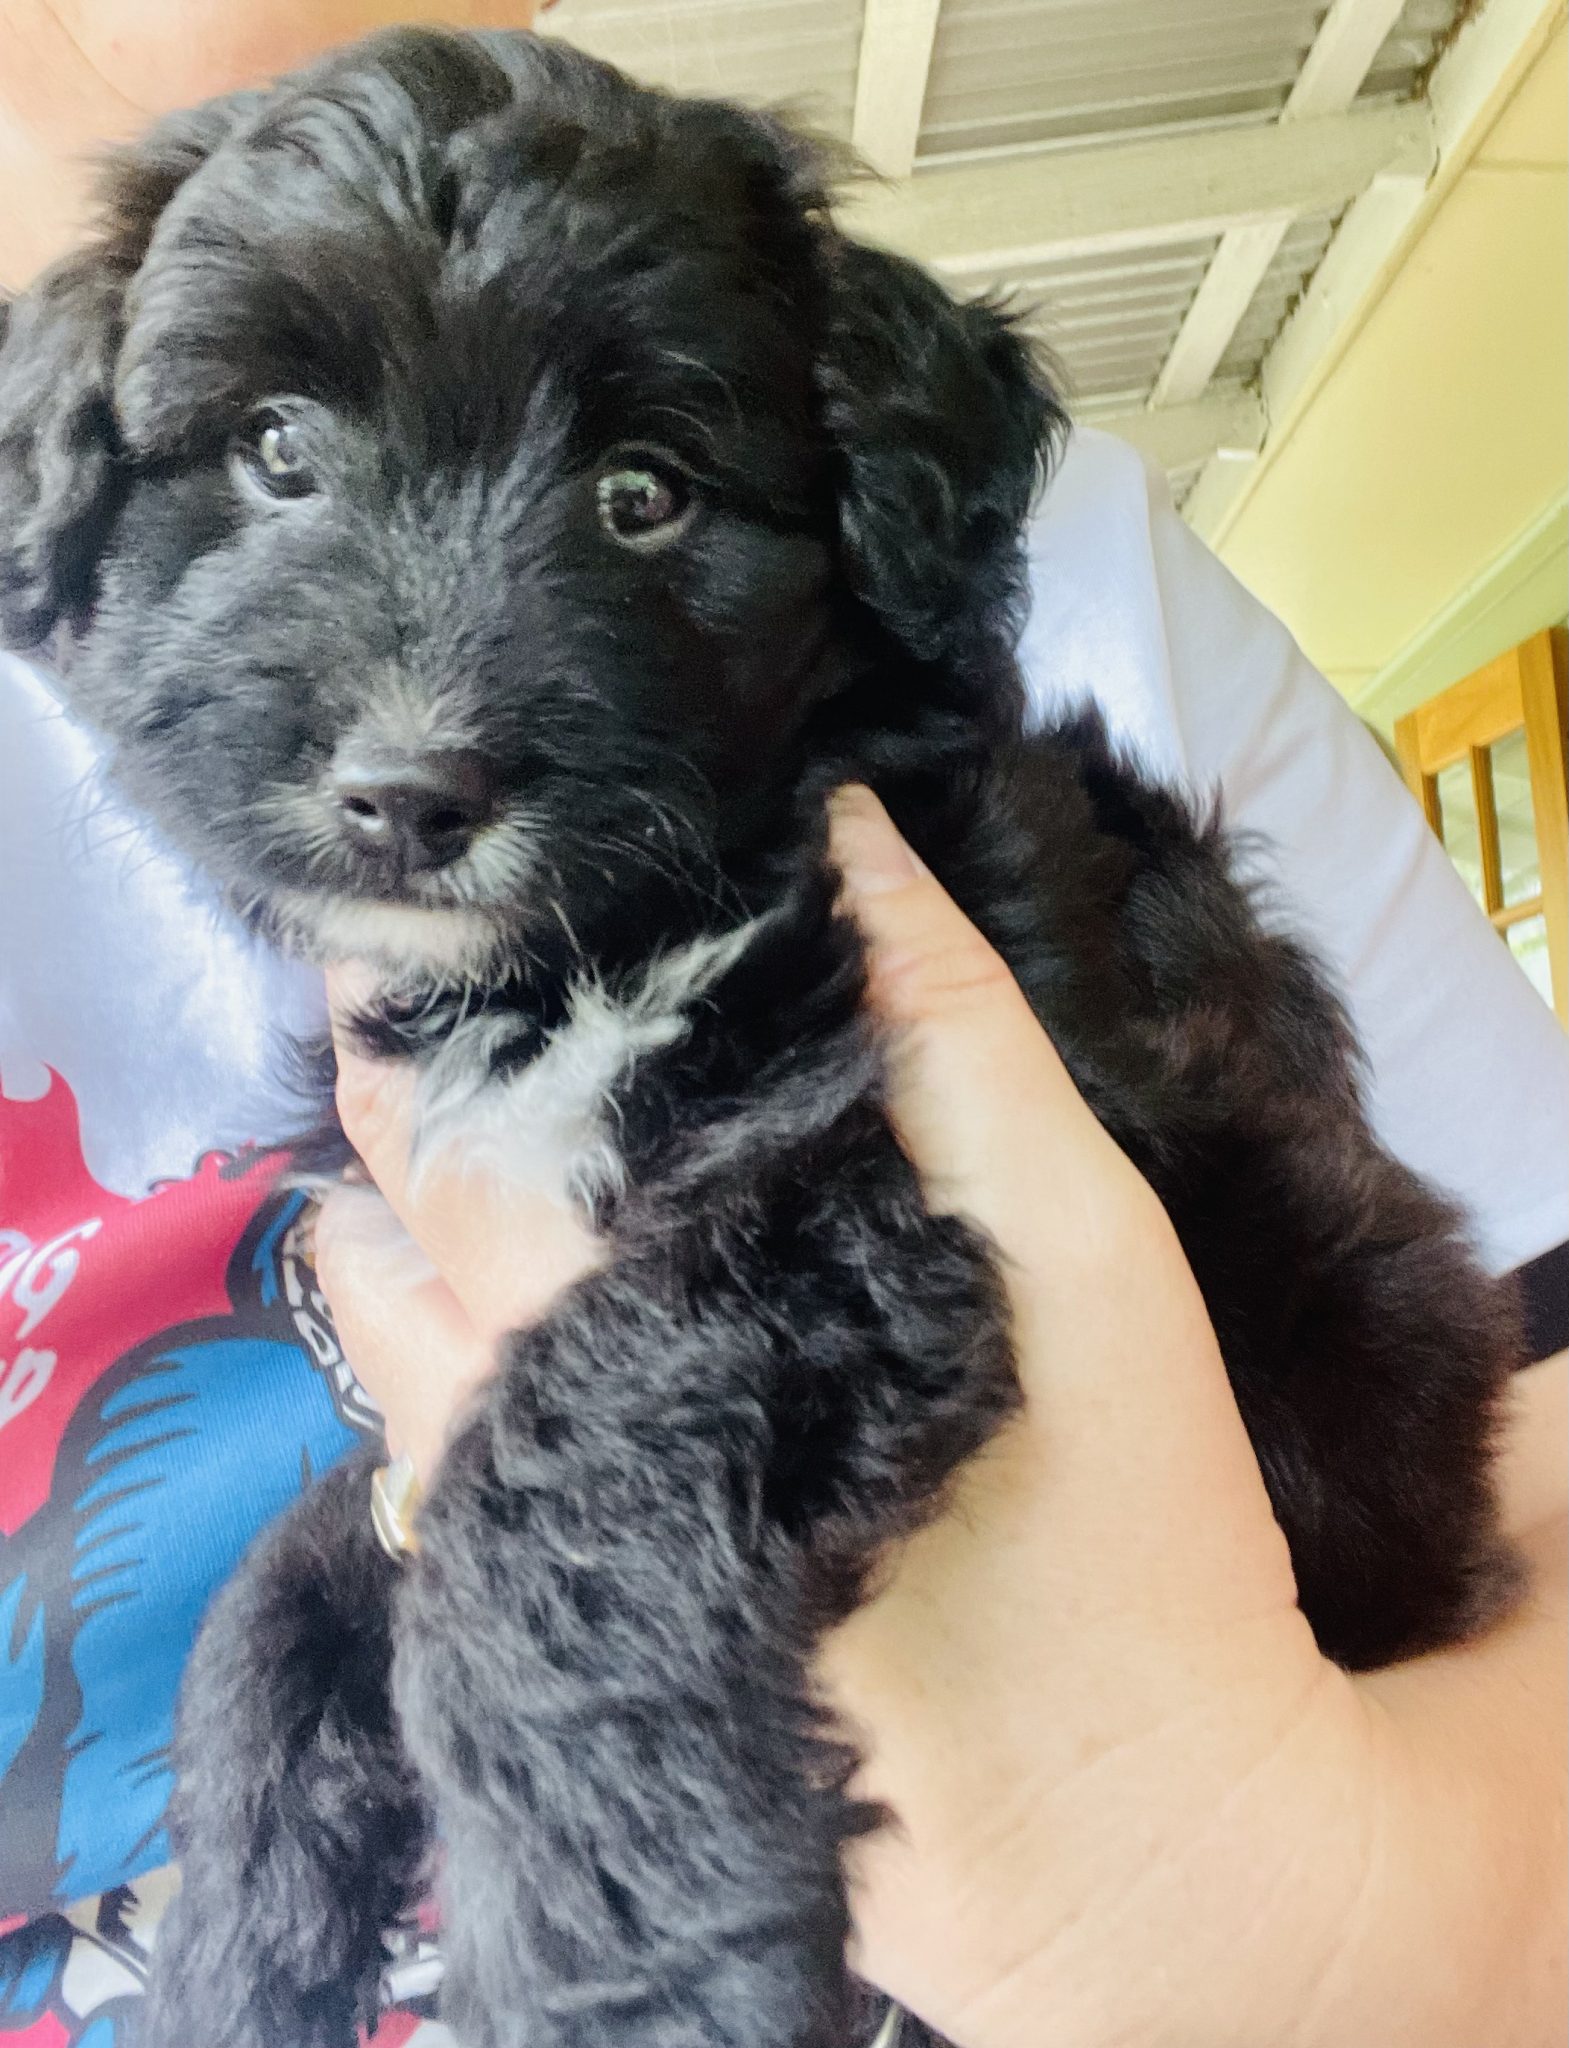 F1b toy cavoodle puppy from loving home breeder.